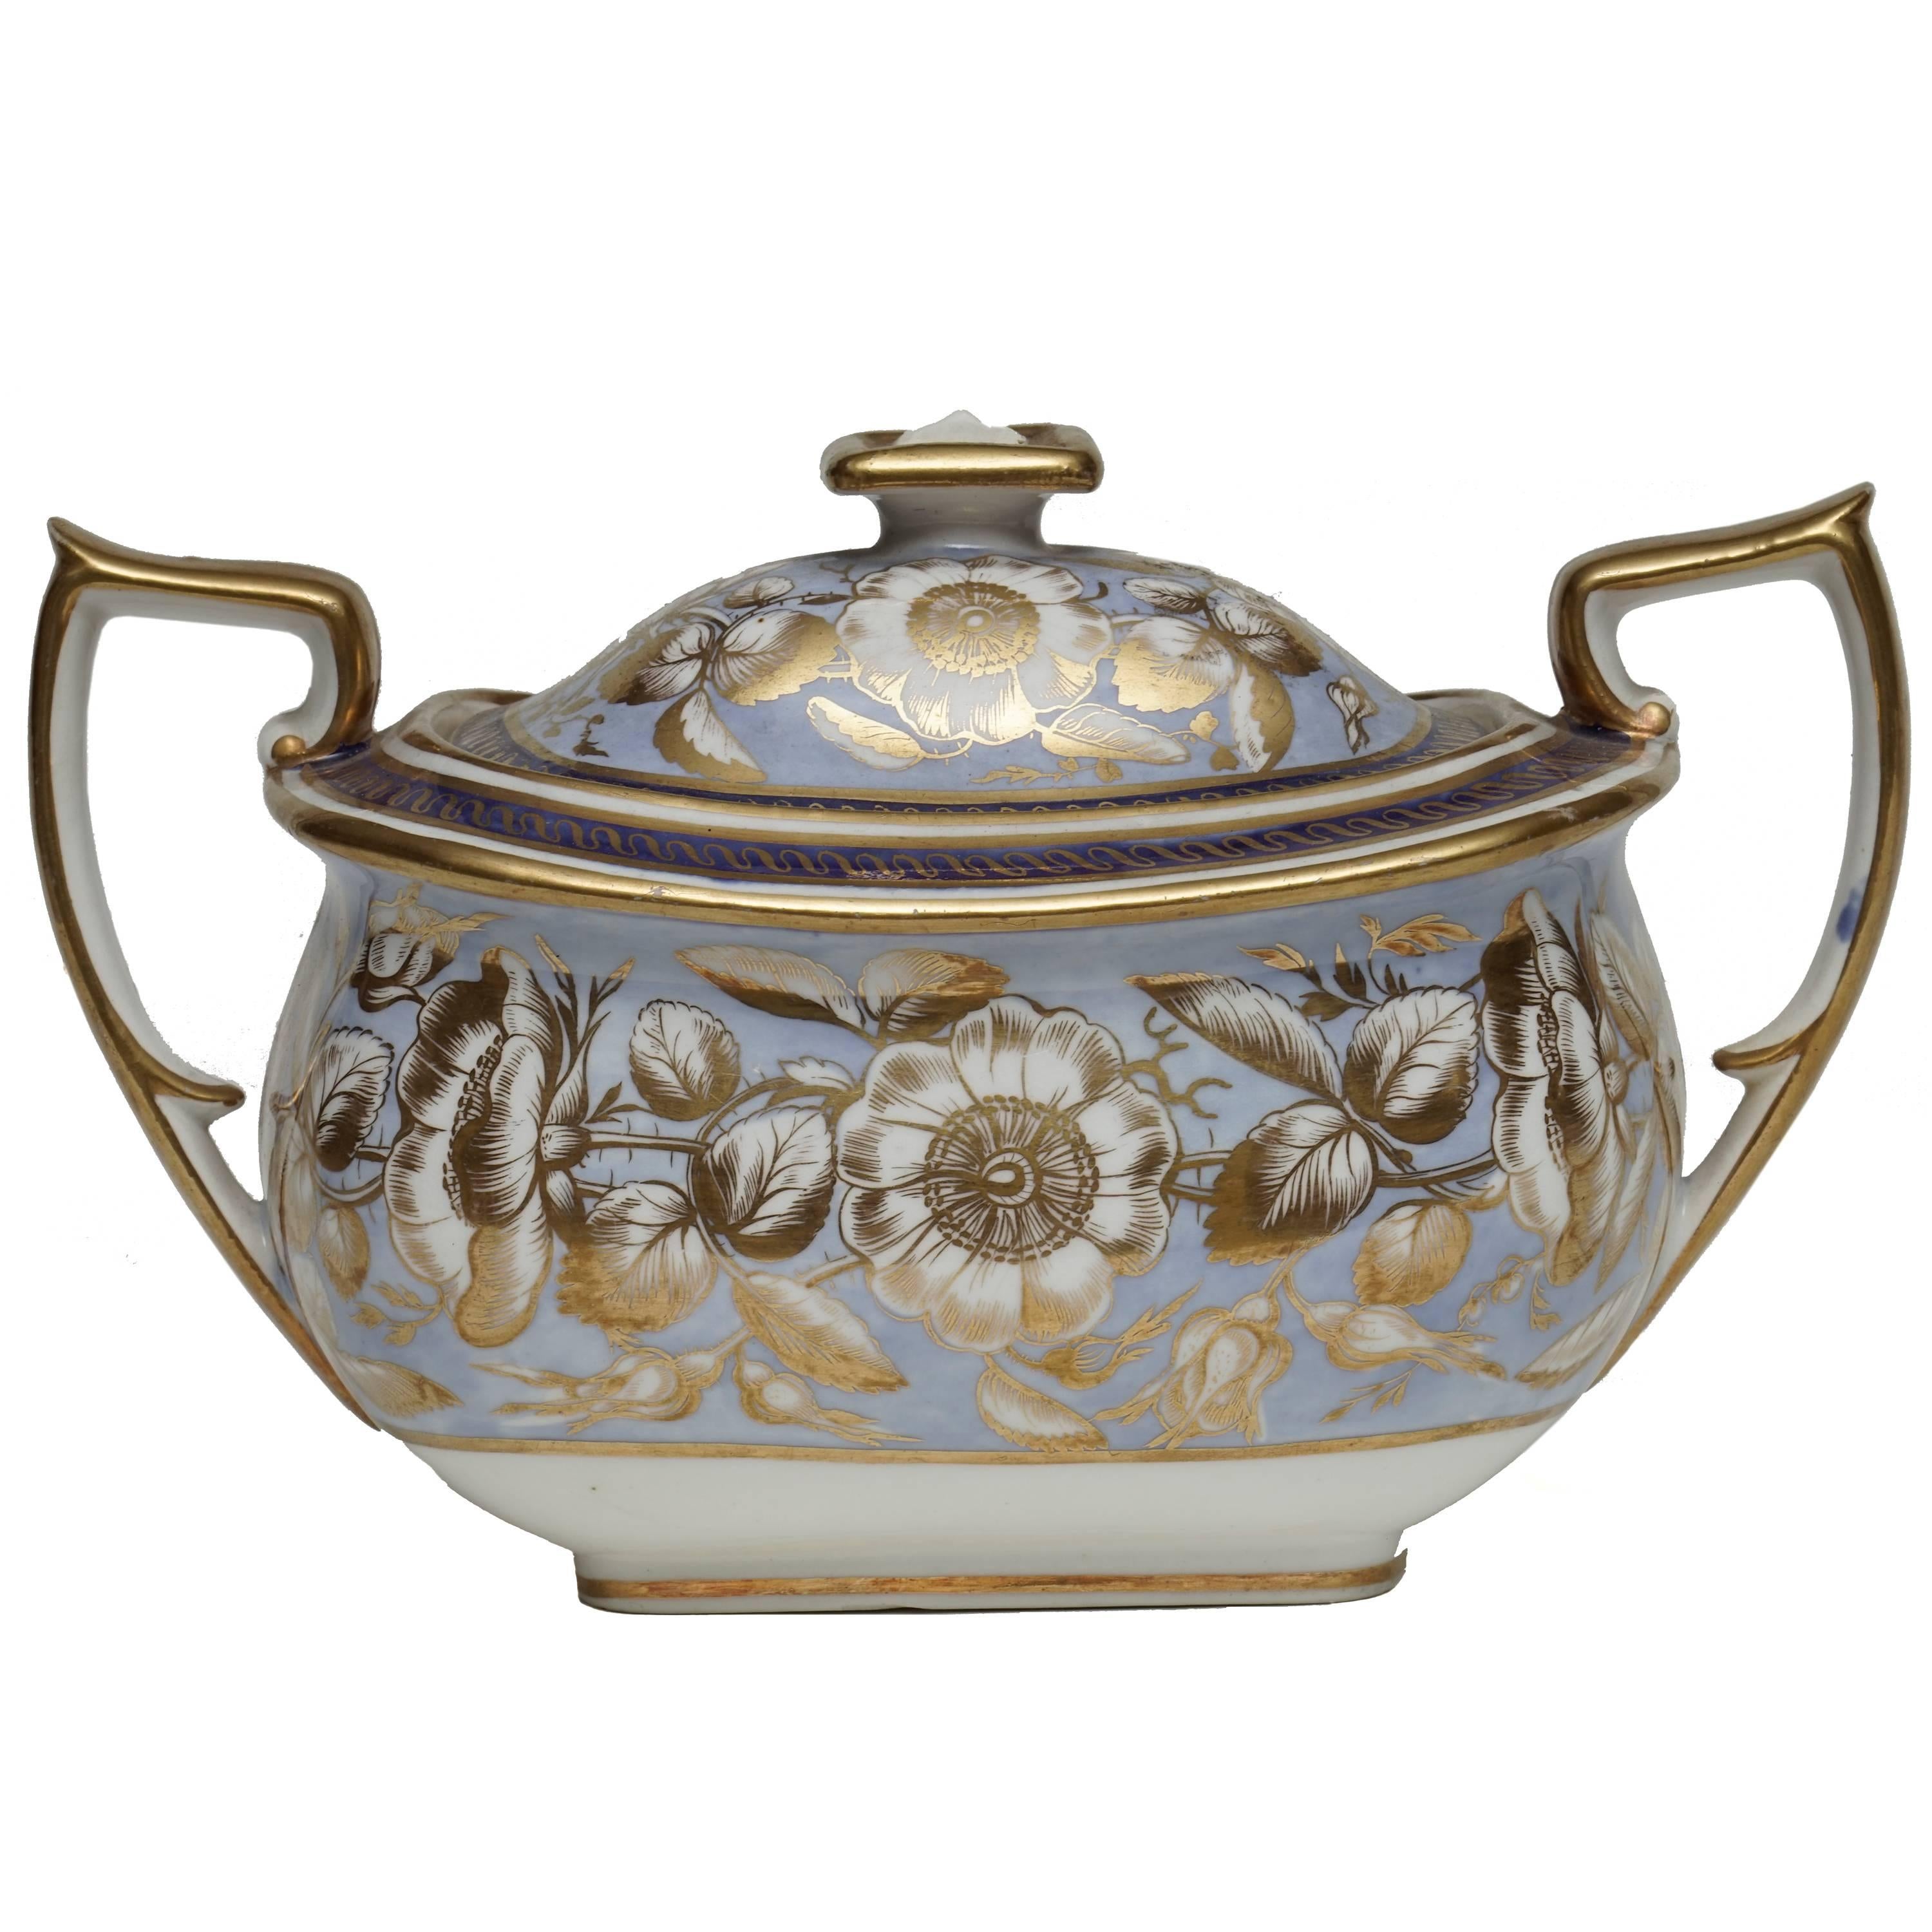 New Hall Double Handled Sugar Bowl and Cover For Sale